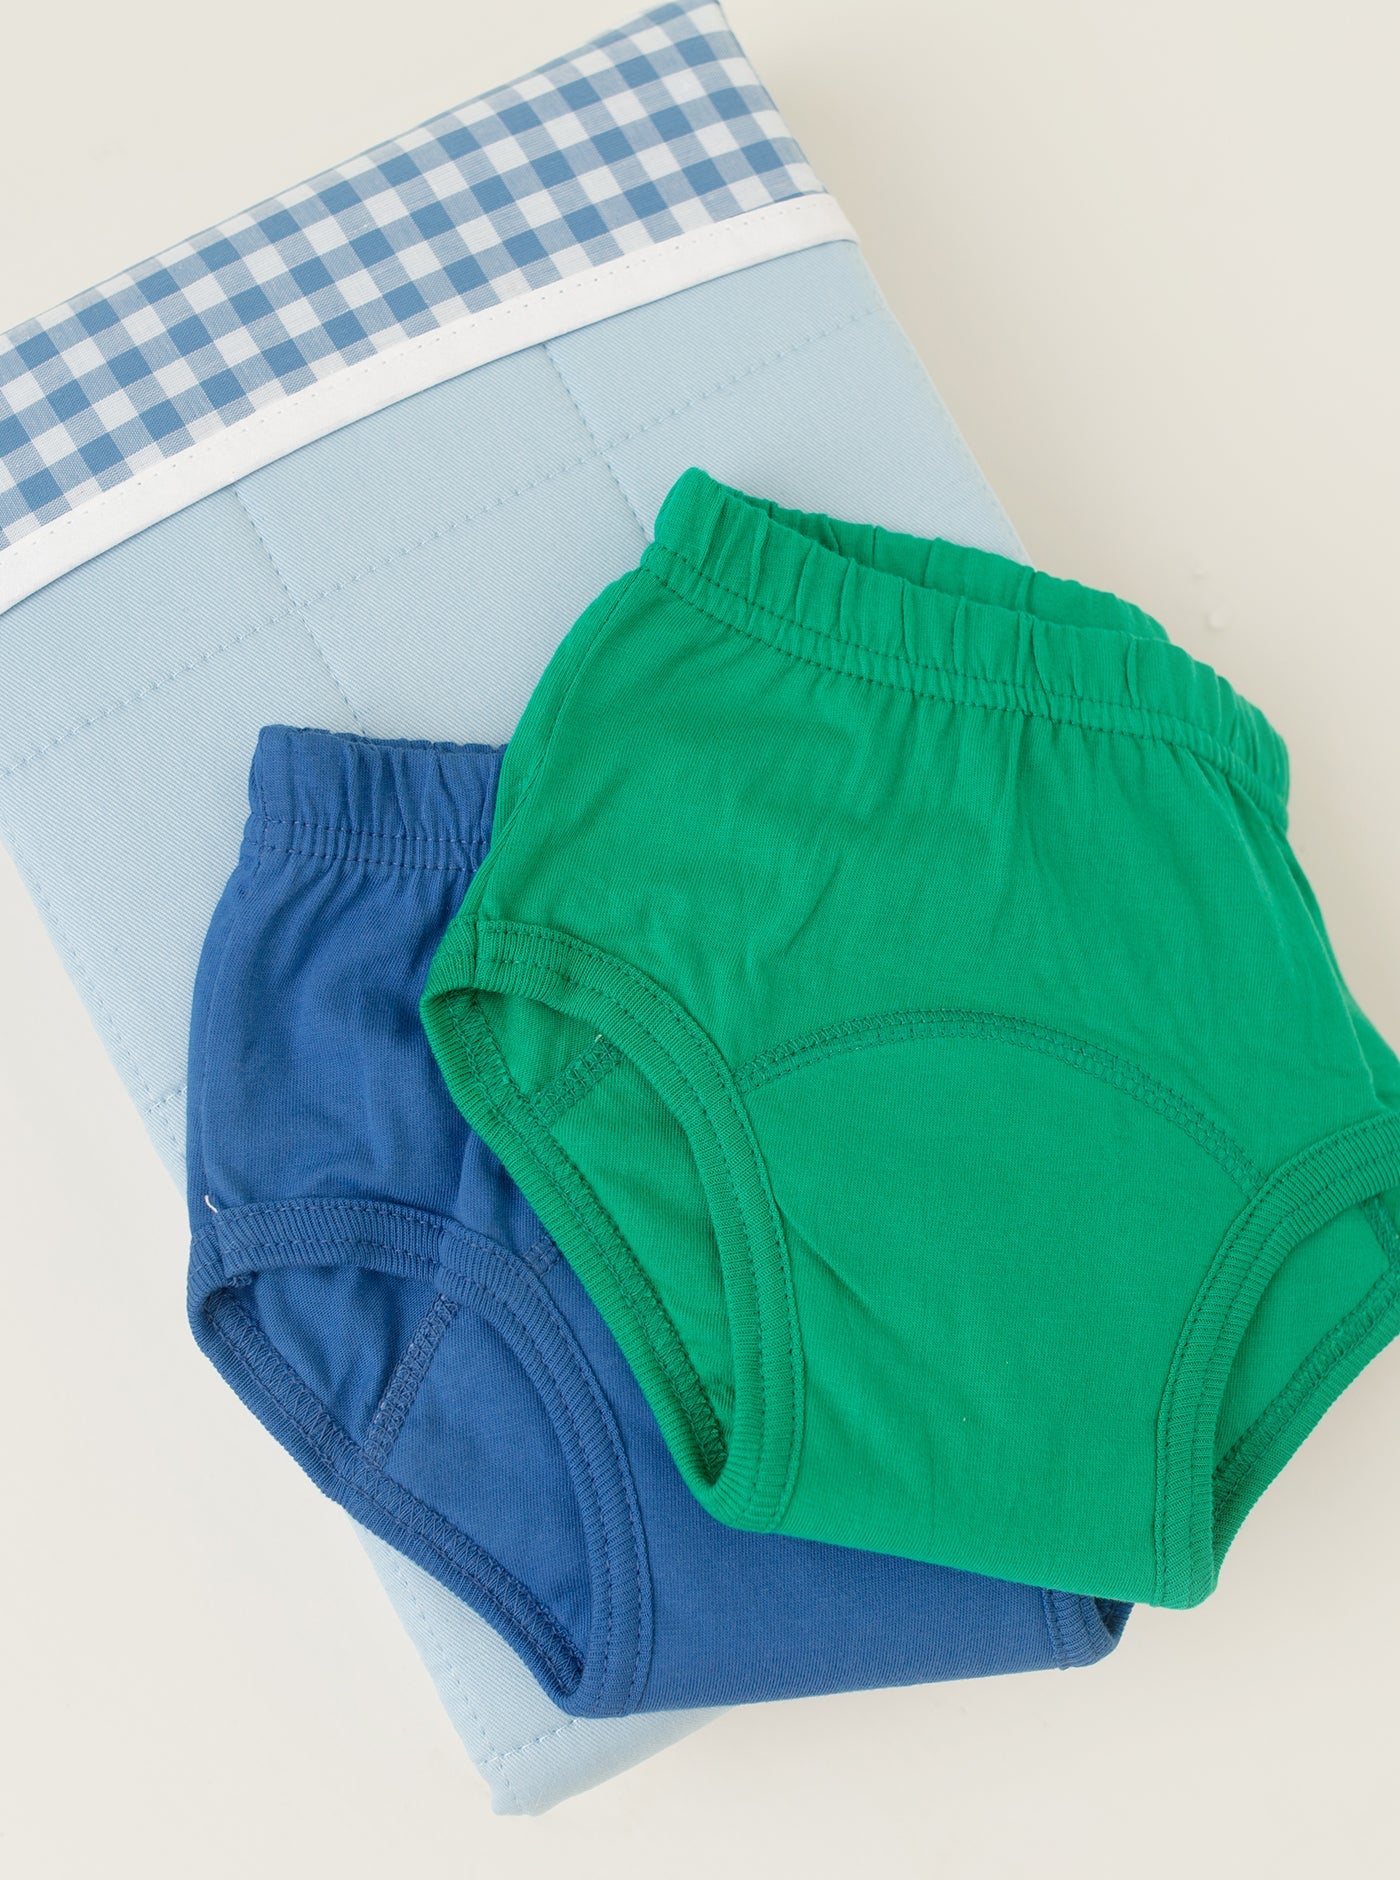 BLue and Green day training pants on folded blue brolly sheet